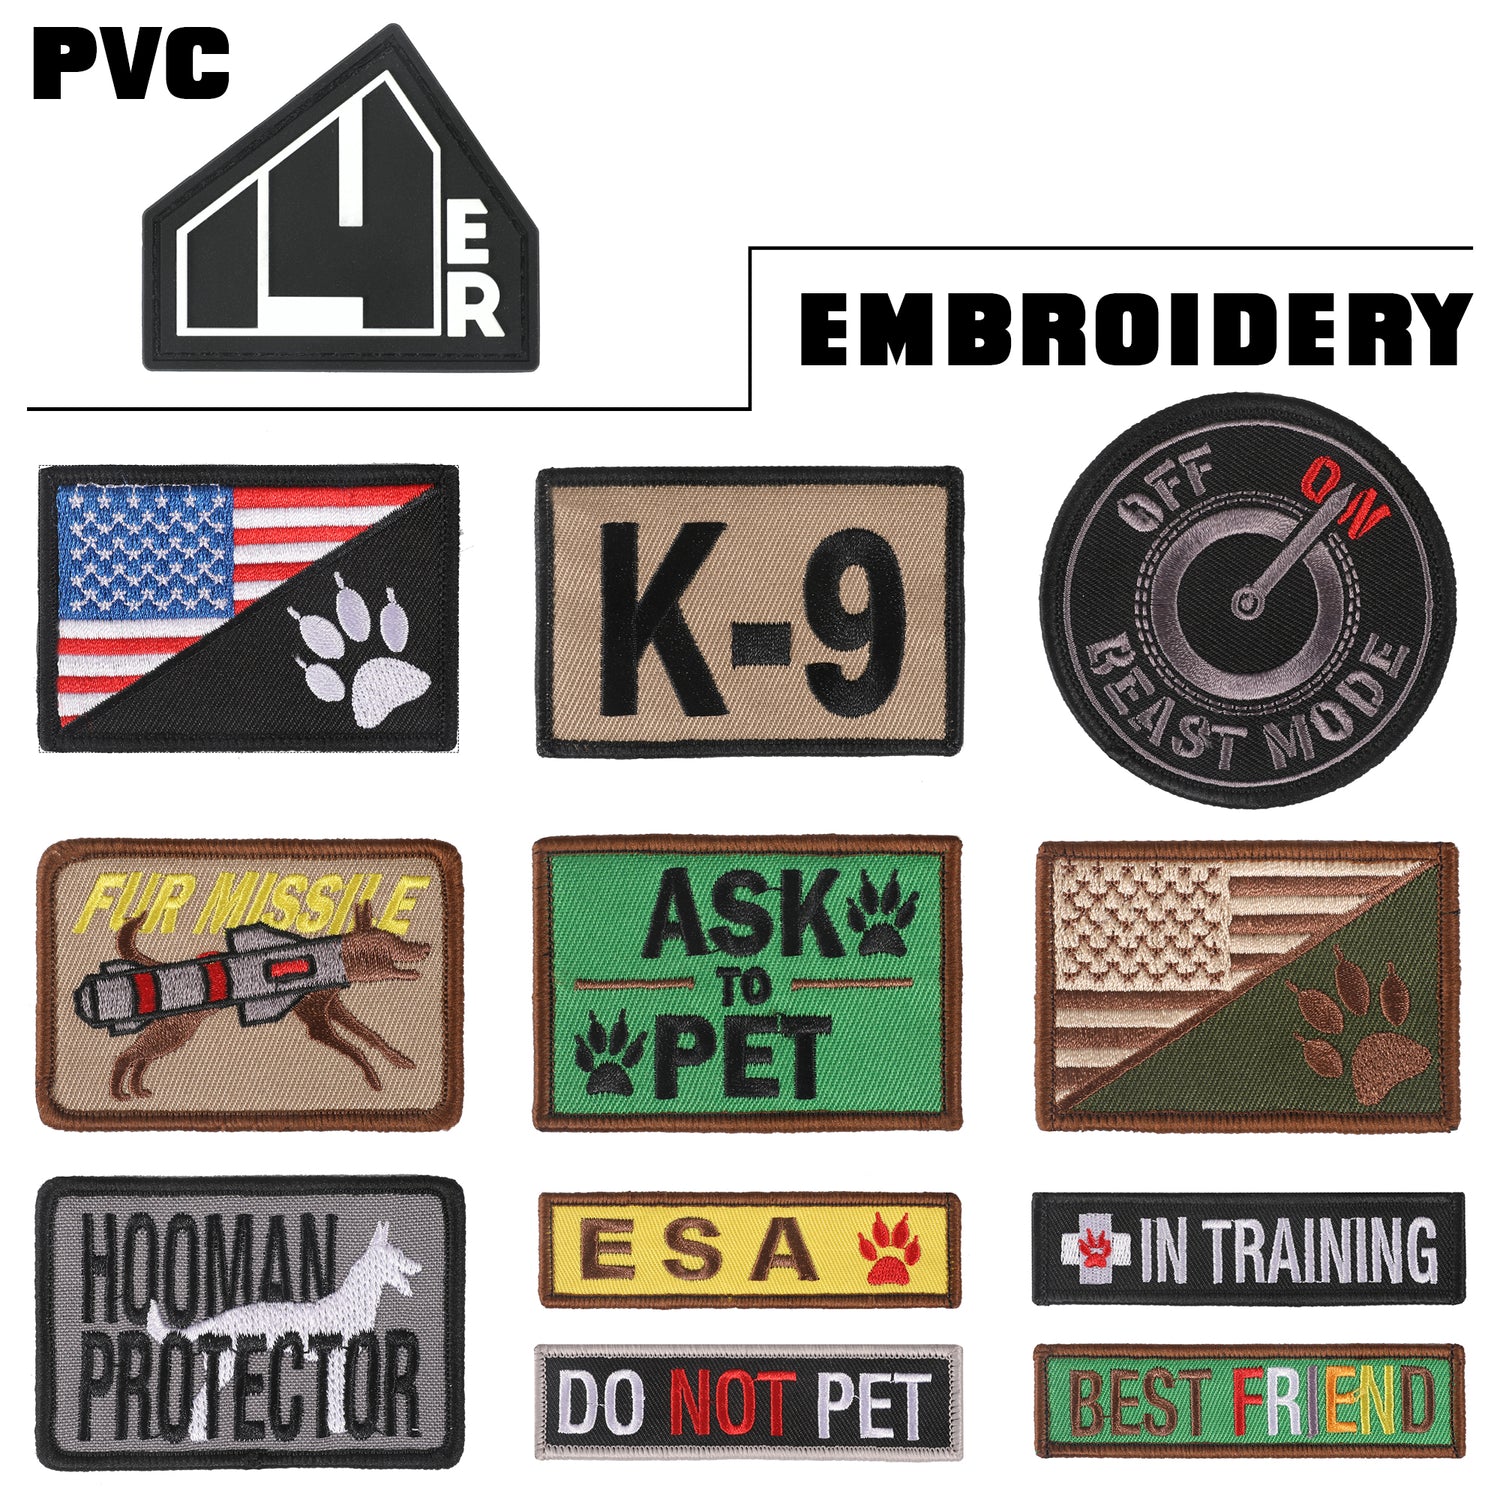 Buy Service Dog Working Training Embroidered Patches Military